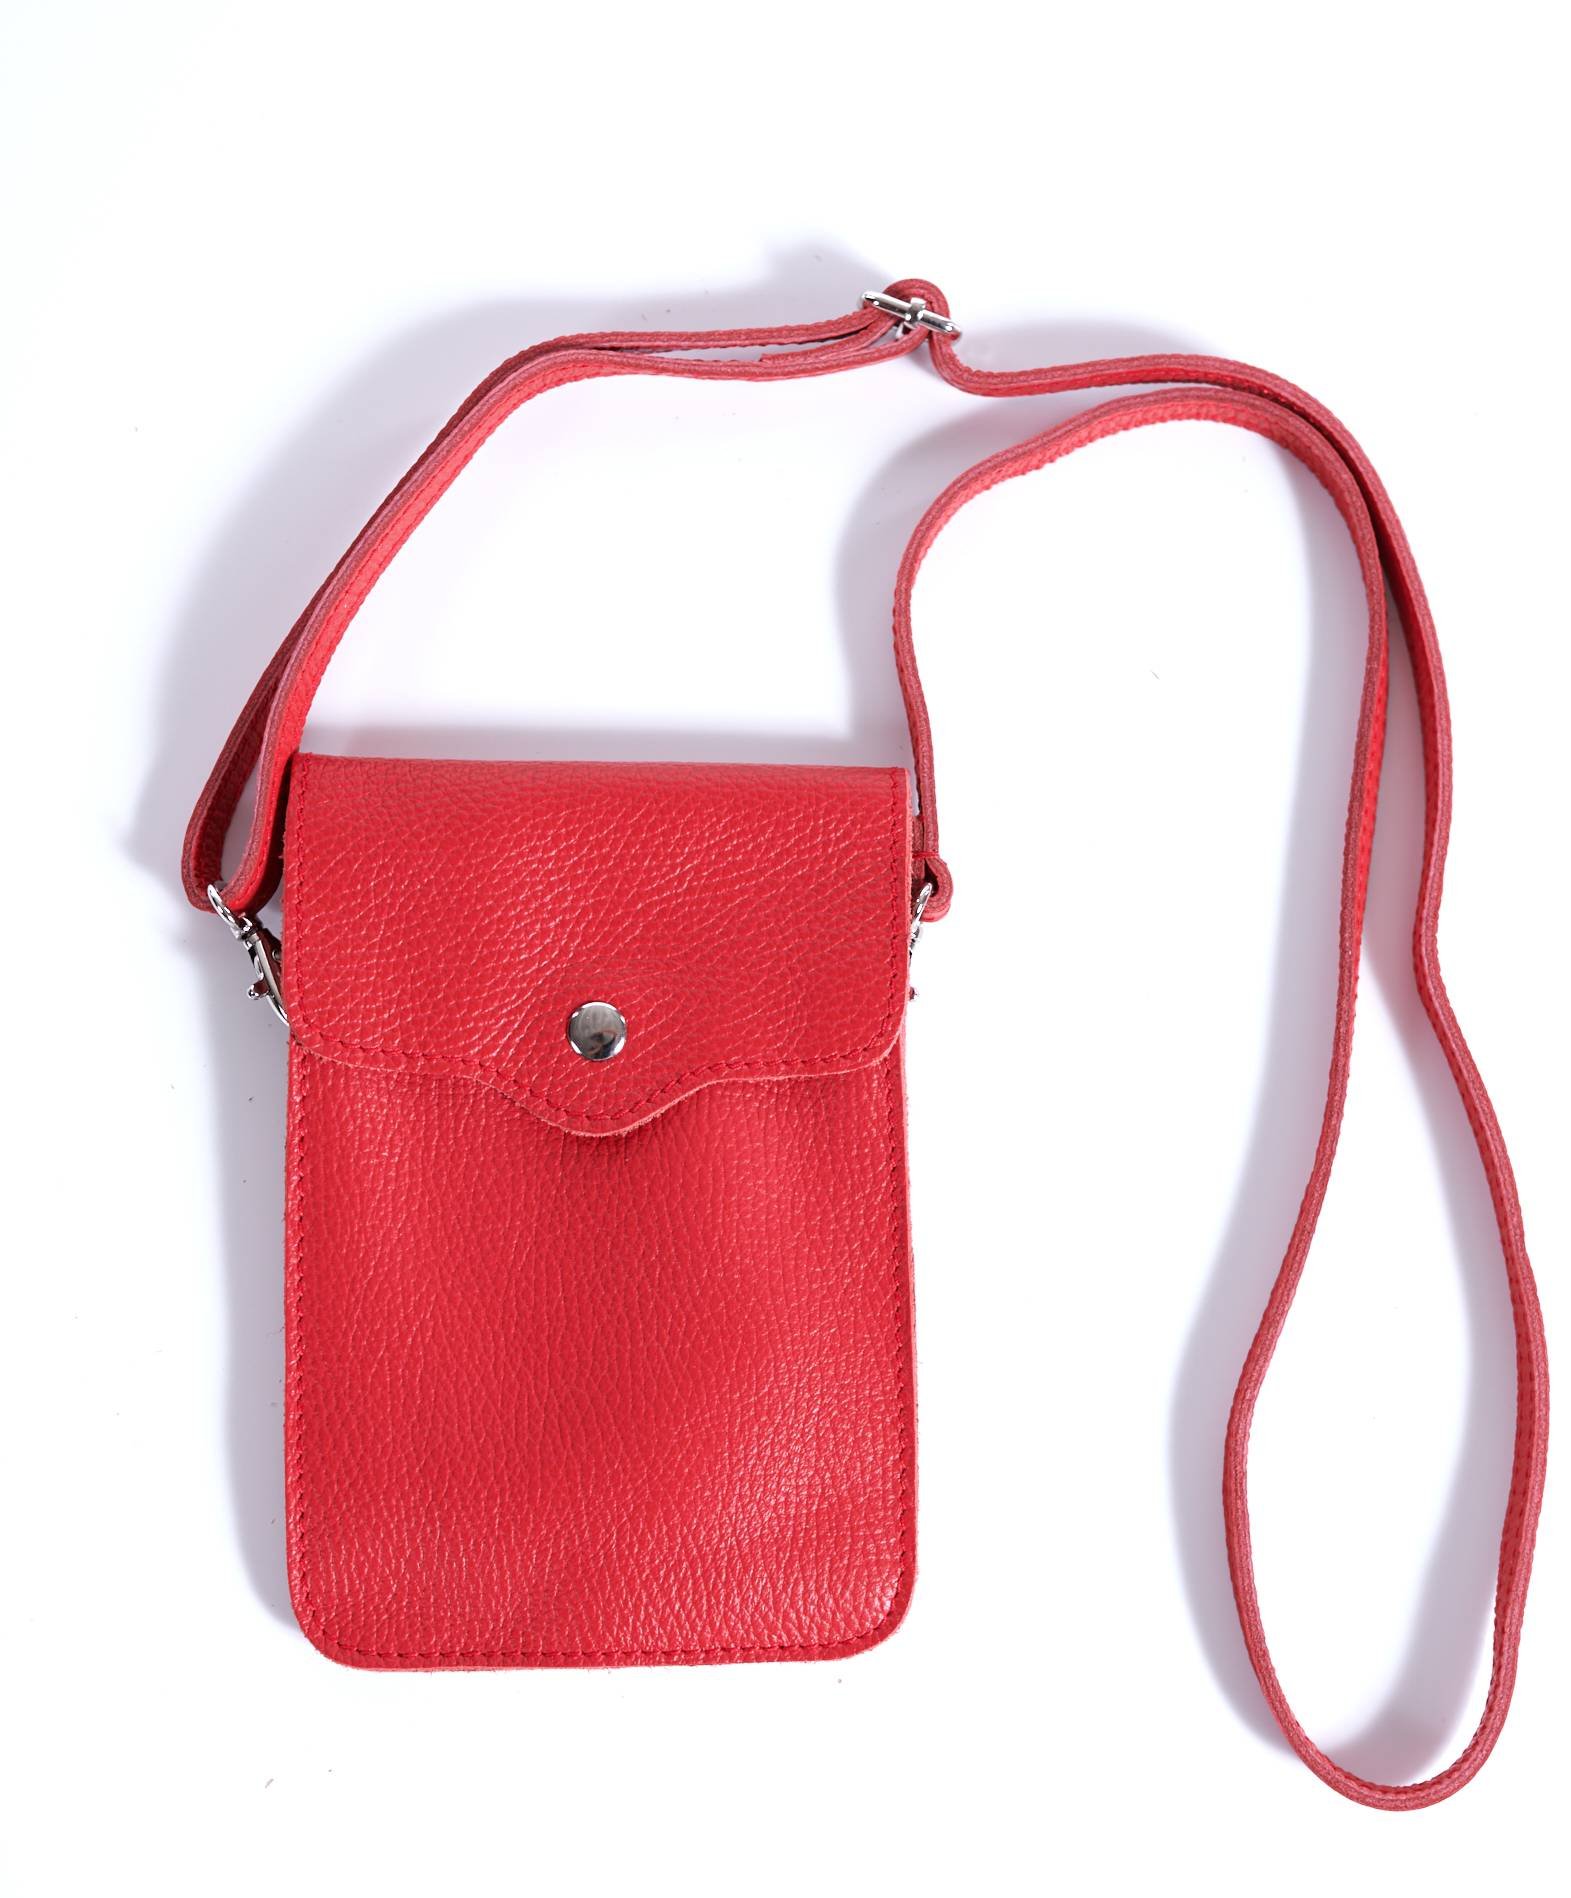 Disney Styling Red Faux Leather Cell Phone Handbag